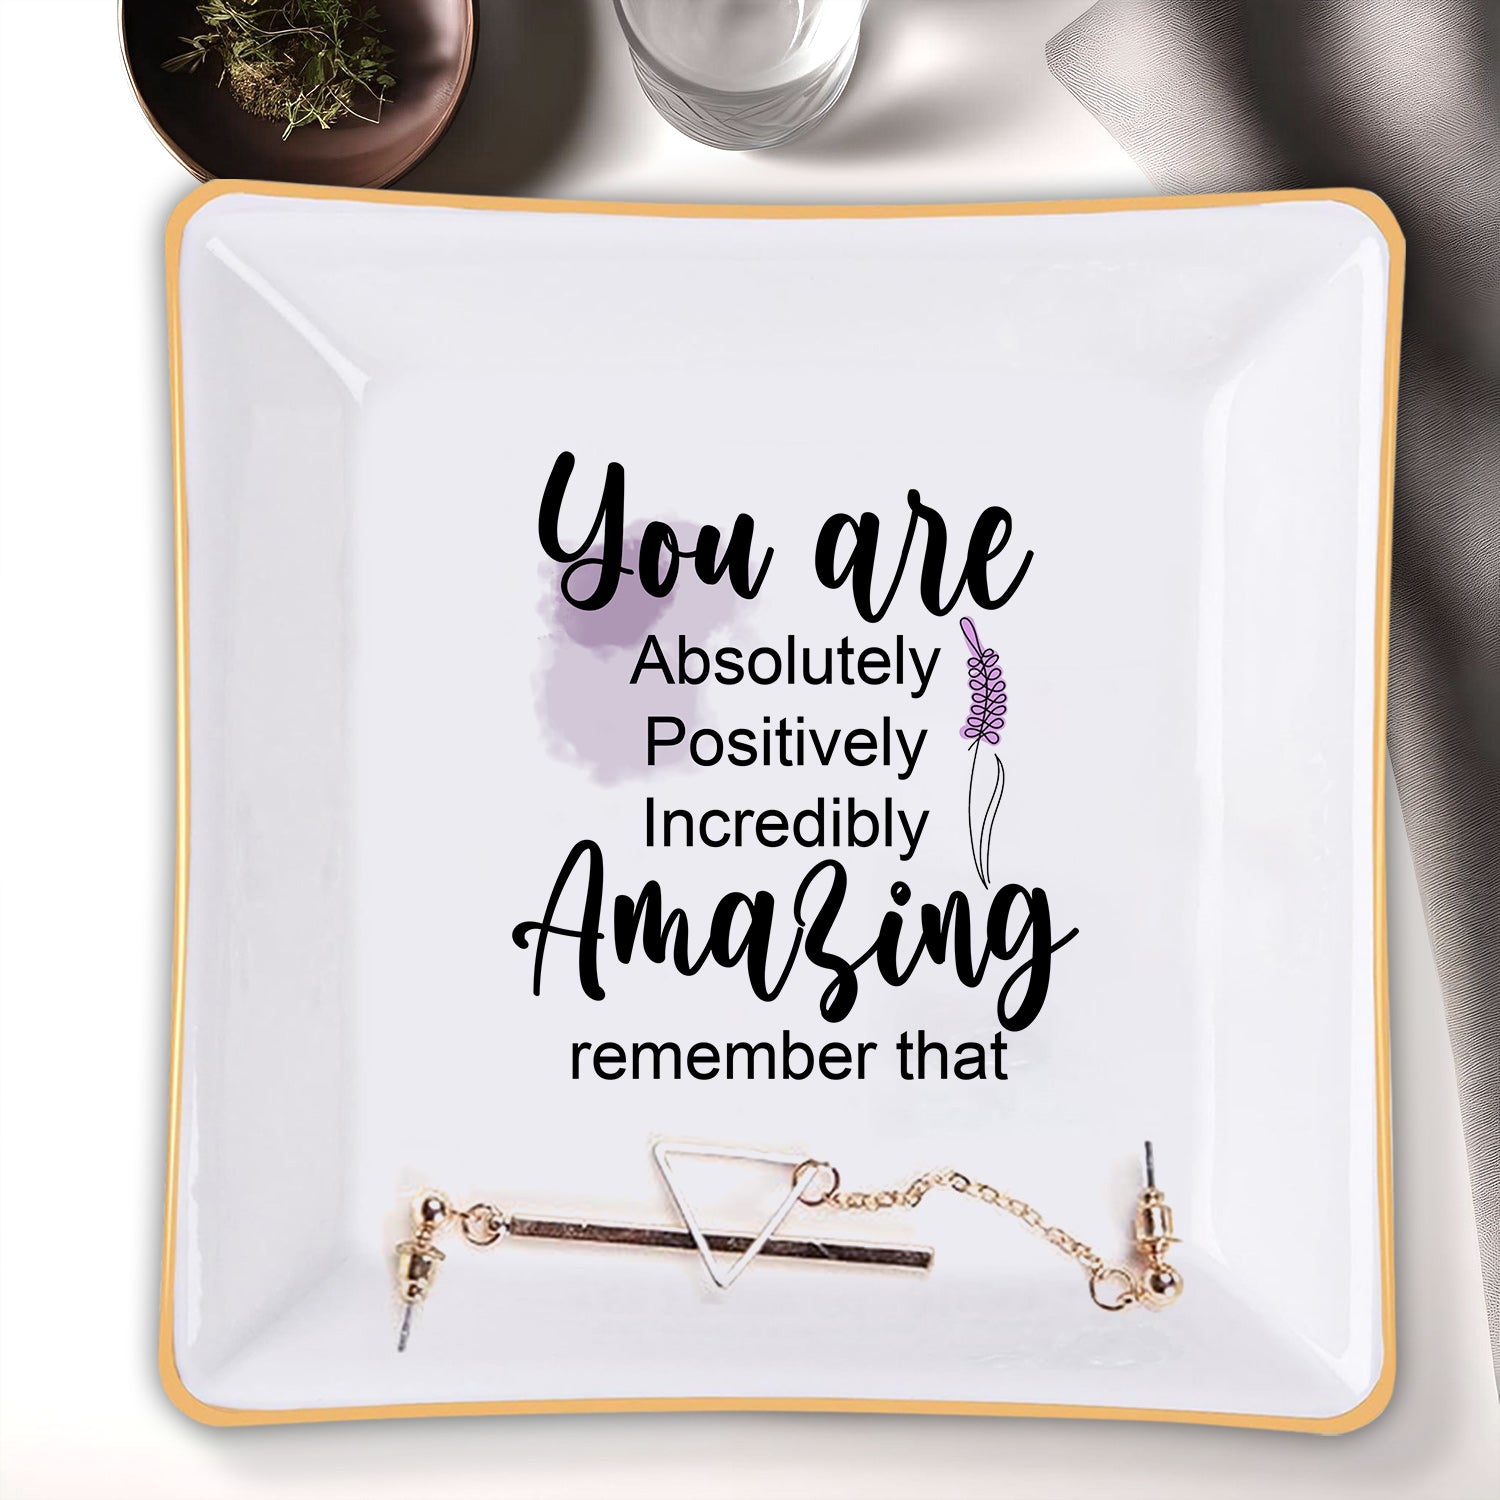 You Are Amazing Remember That Christian Gifts Inspirational Religious Gifts Ceramic Ring Dish